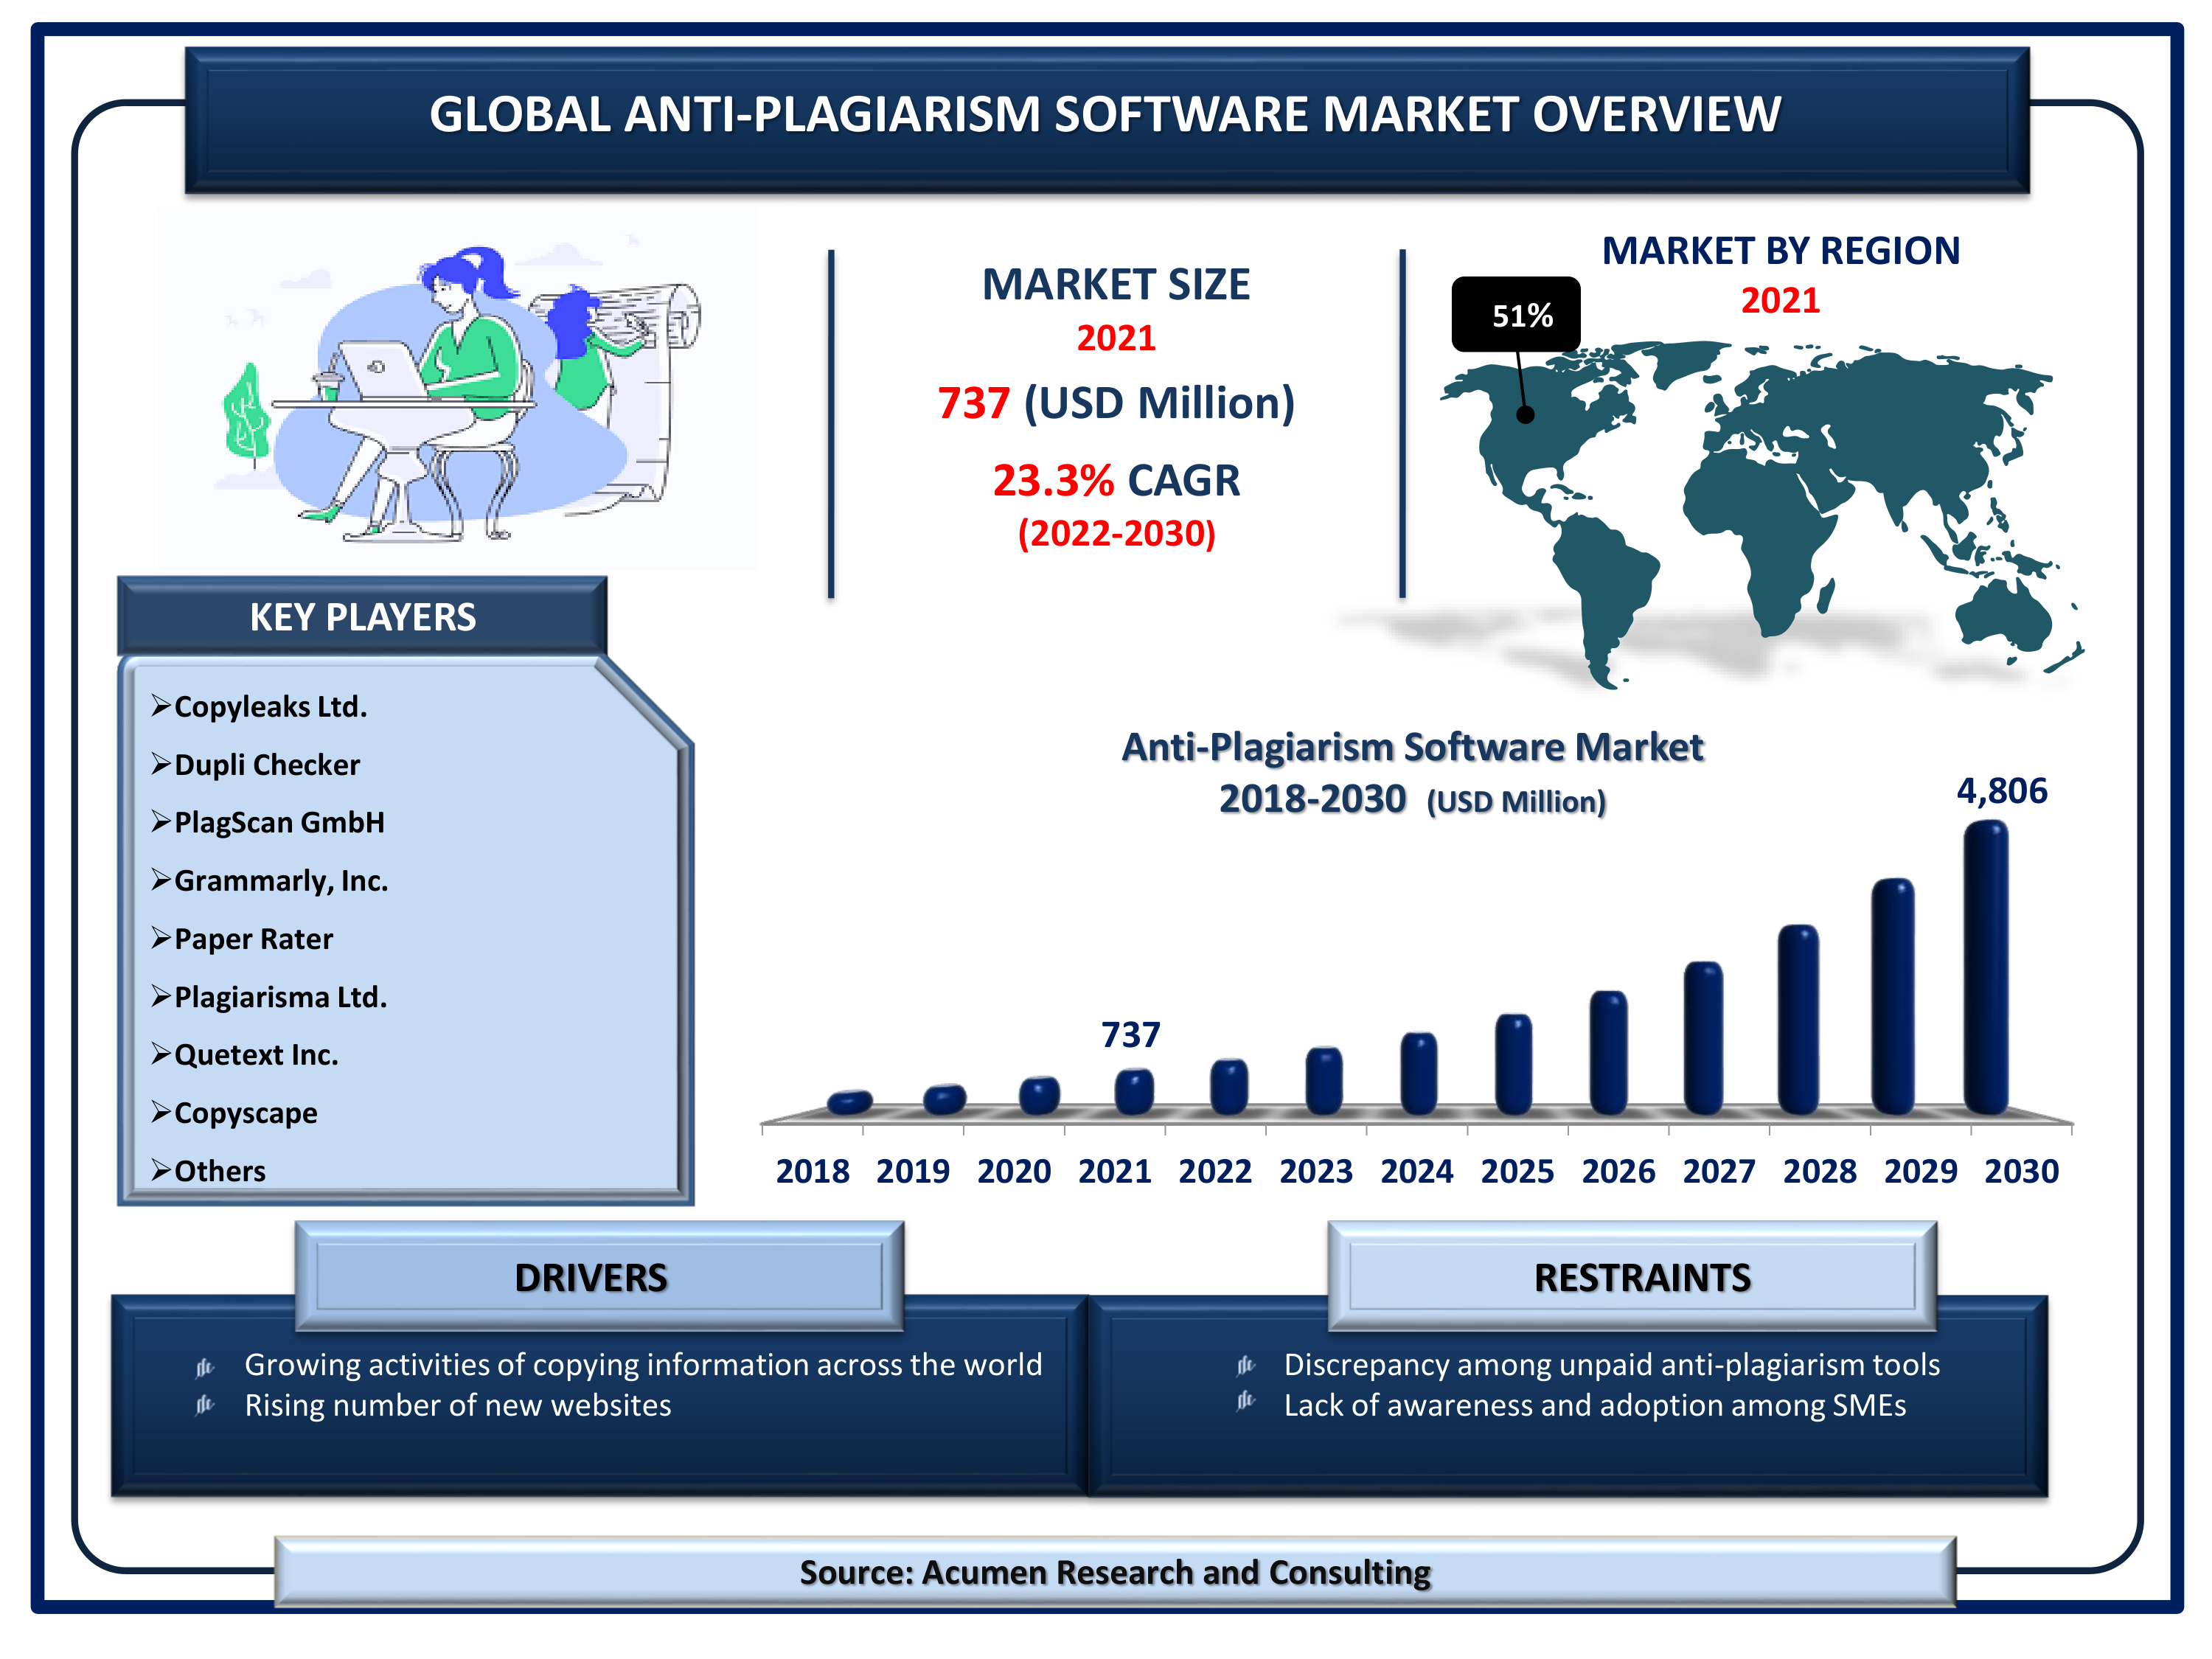 The Global Anti-Plagiarism Software Market Size was valued at USD 737 million in 2021 and is estimated to achieve a market size of USD 4,806 million by 2030; growing at a CAGR of 23.3%.